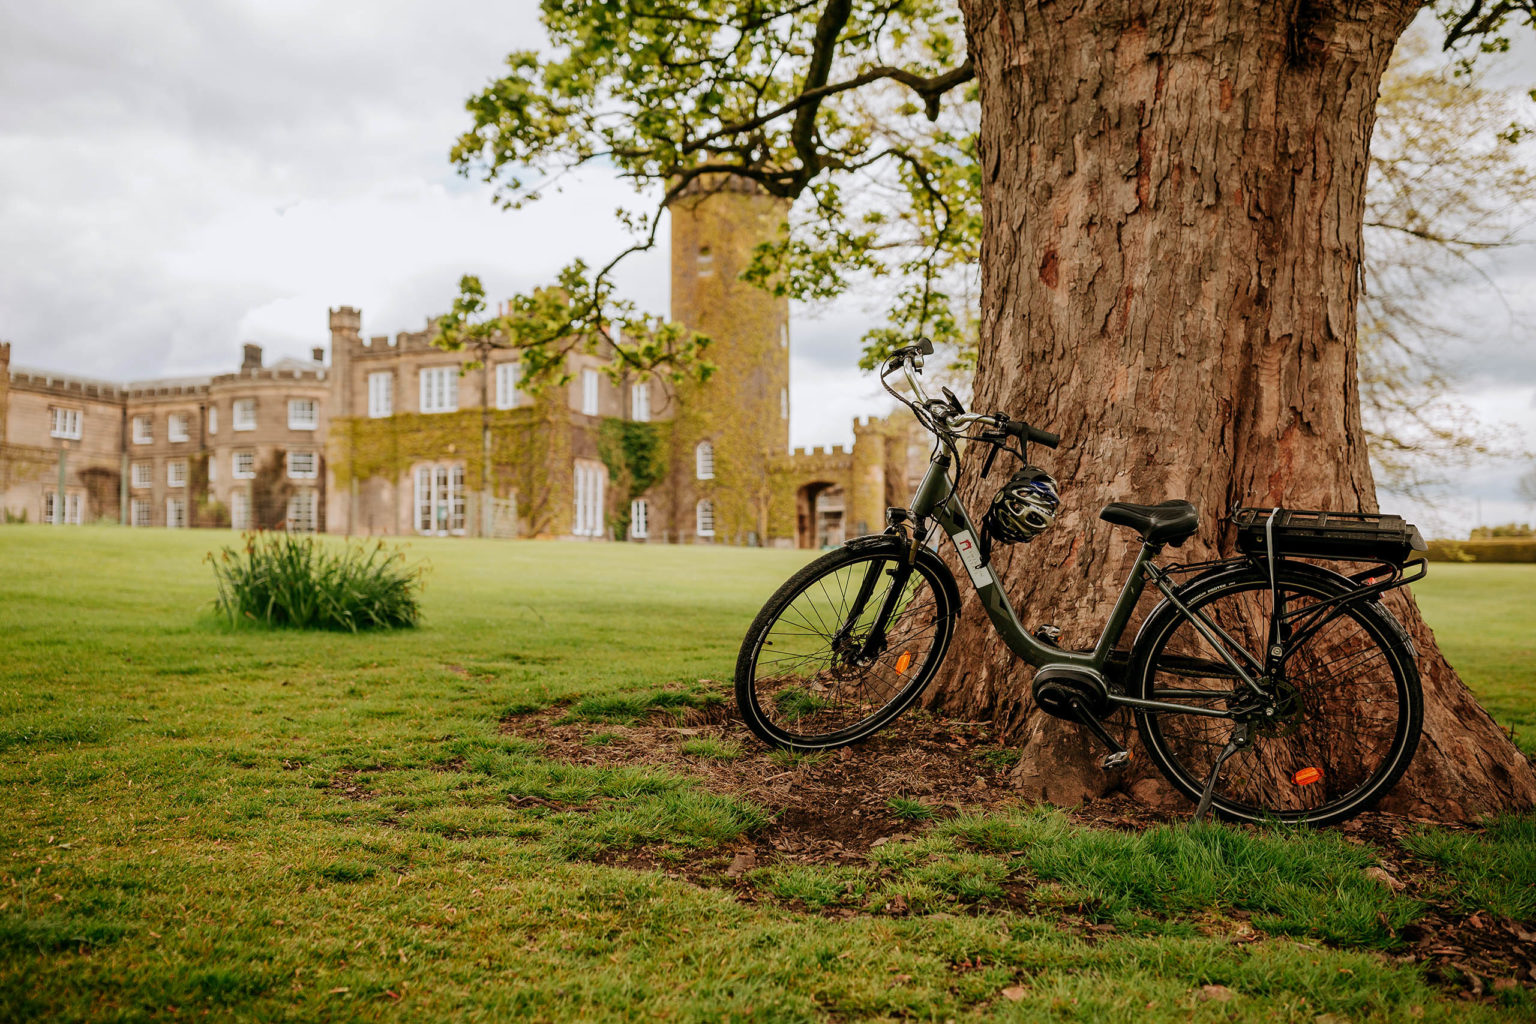 An electric bicycle for hire leaning against a tree on the Swinton Estate in North Yorkshire